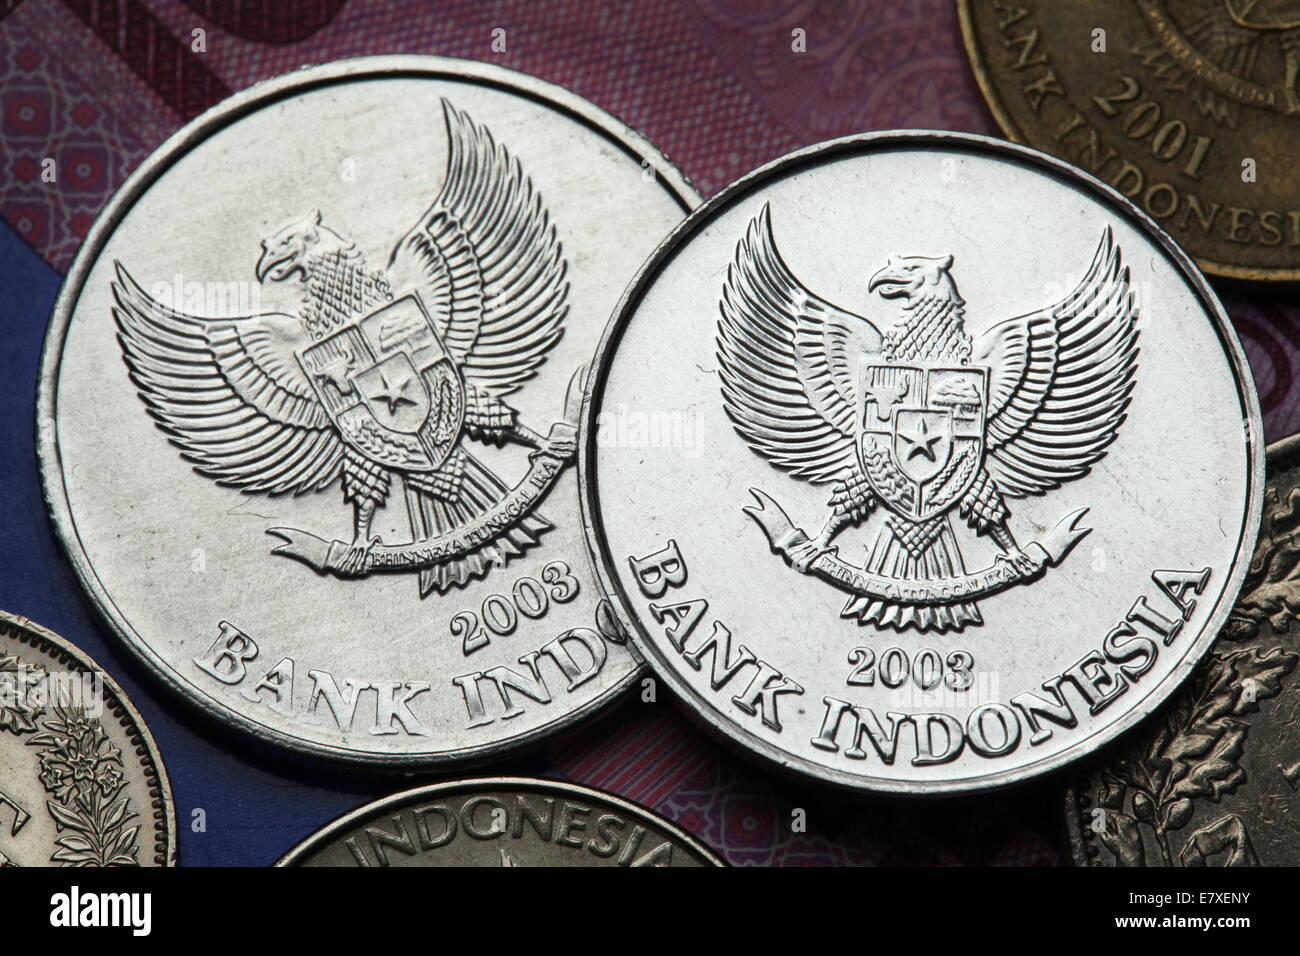 Coins of Indonesia. National emblem of Indonesia called the Garuda  Pancasila depicted in Indonesian rupiah coins Stock Photo - Alamy